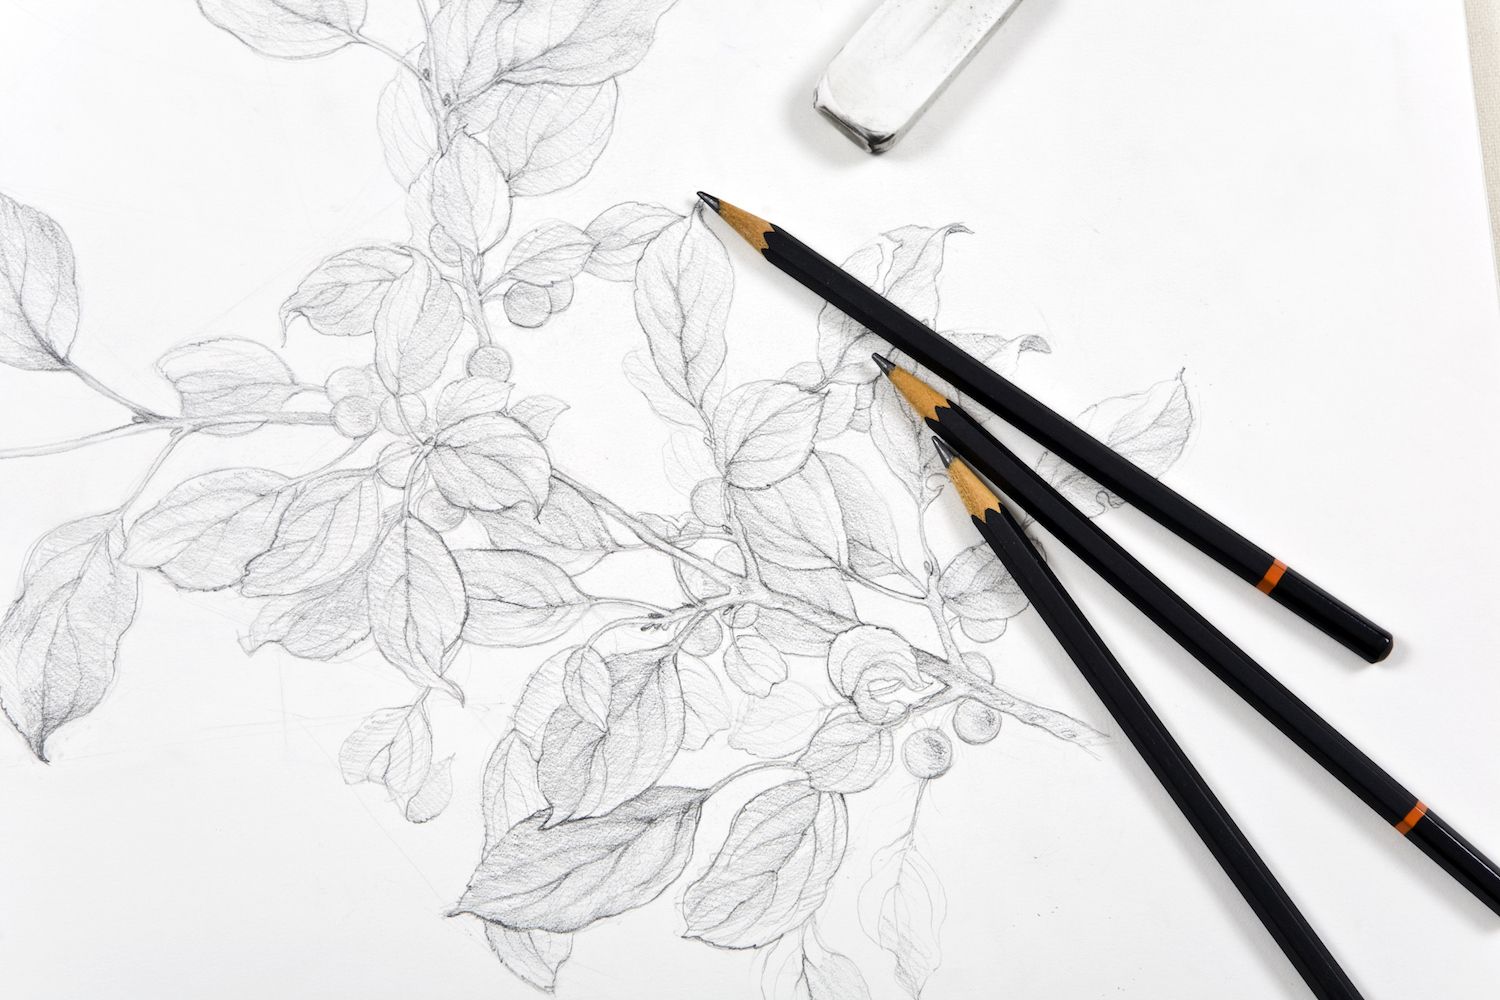 Which pencils should I use to draw human sketches? - Quora